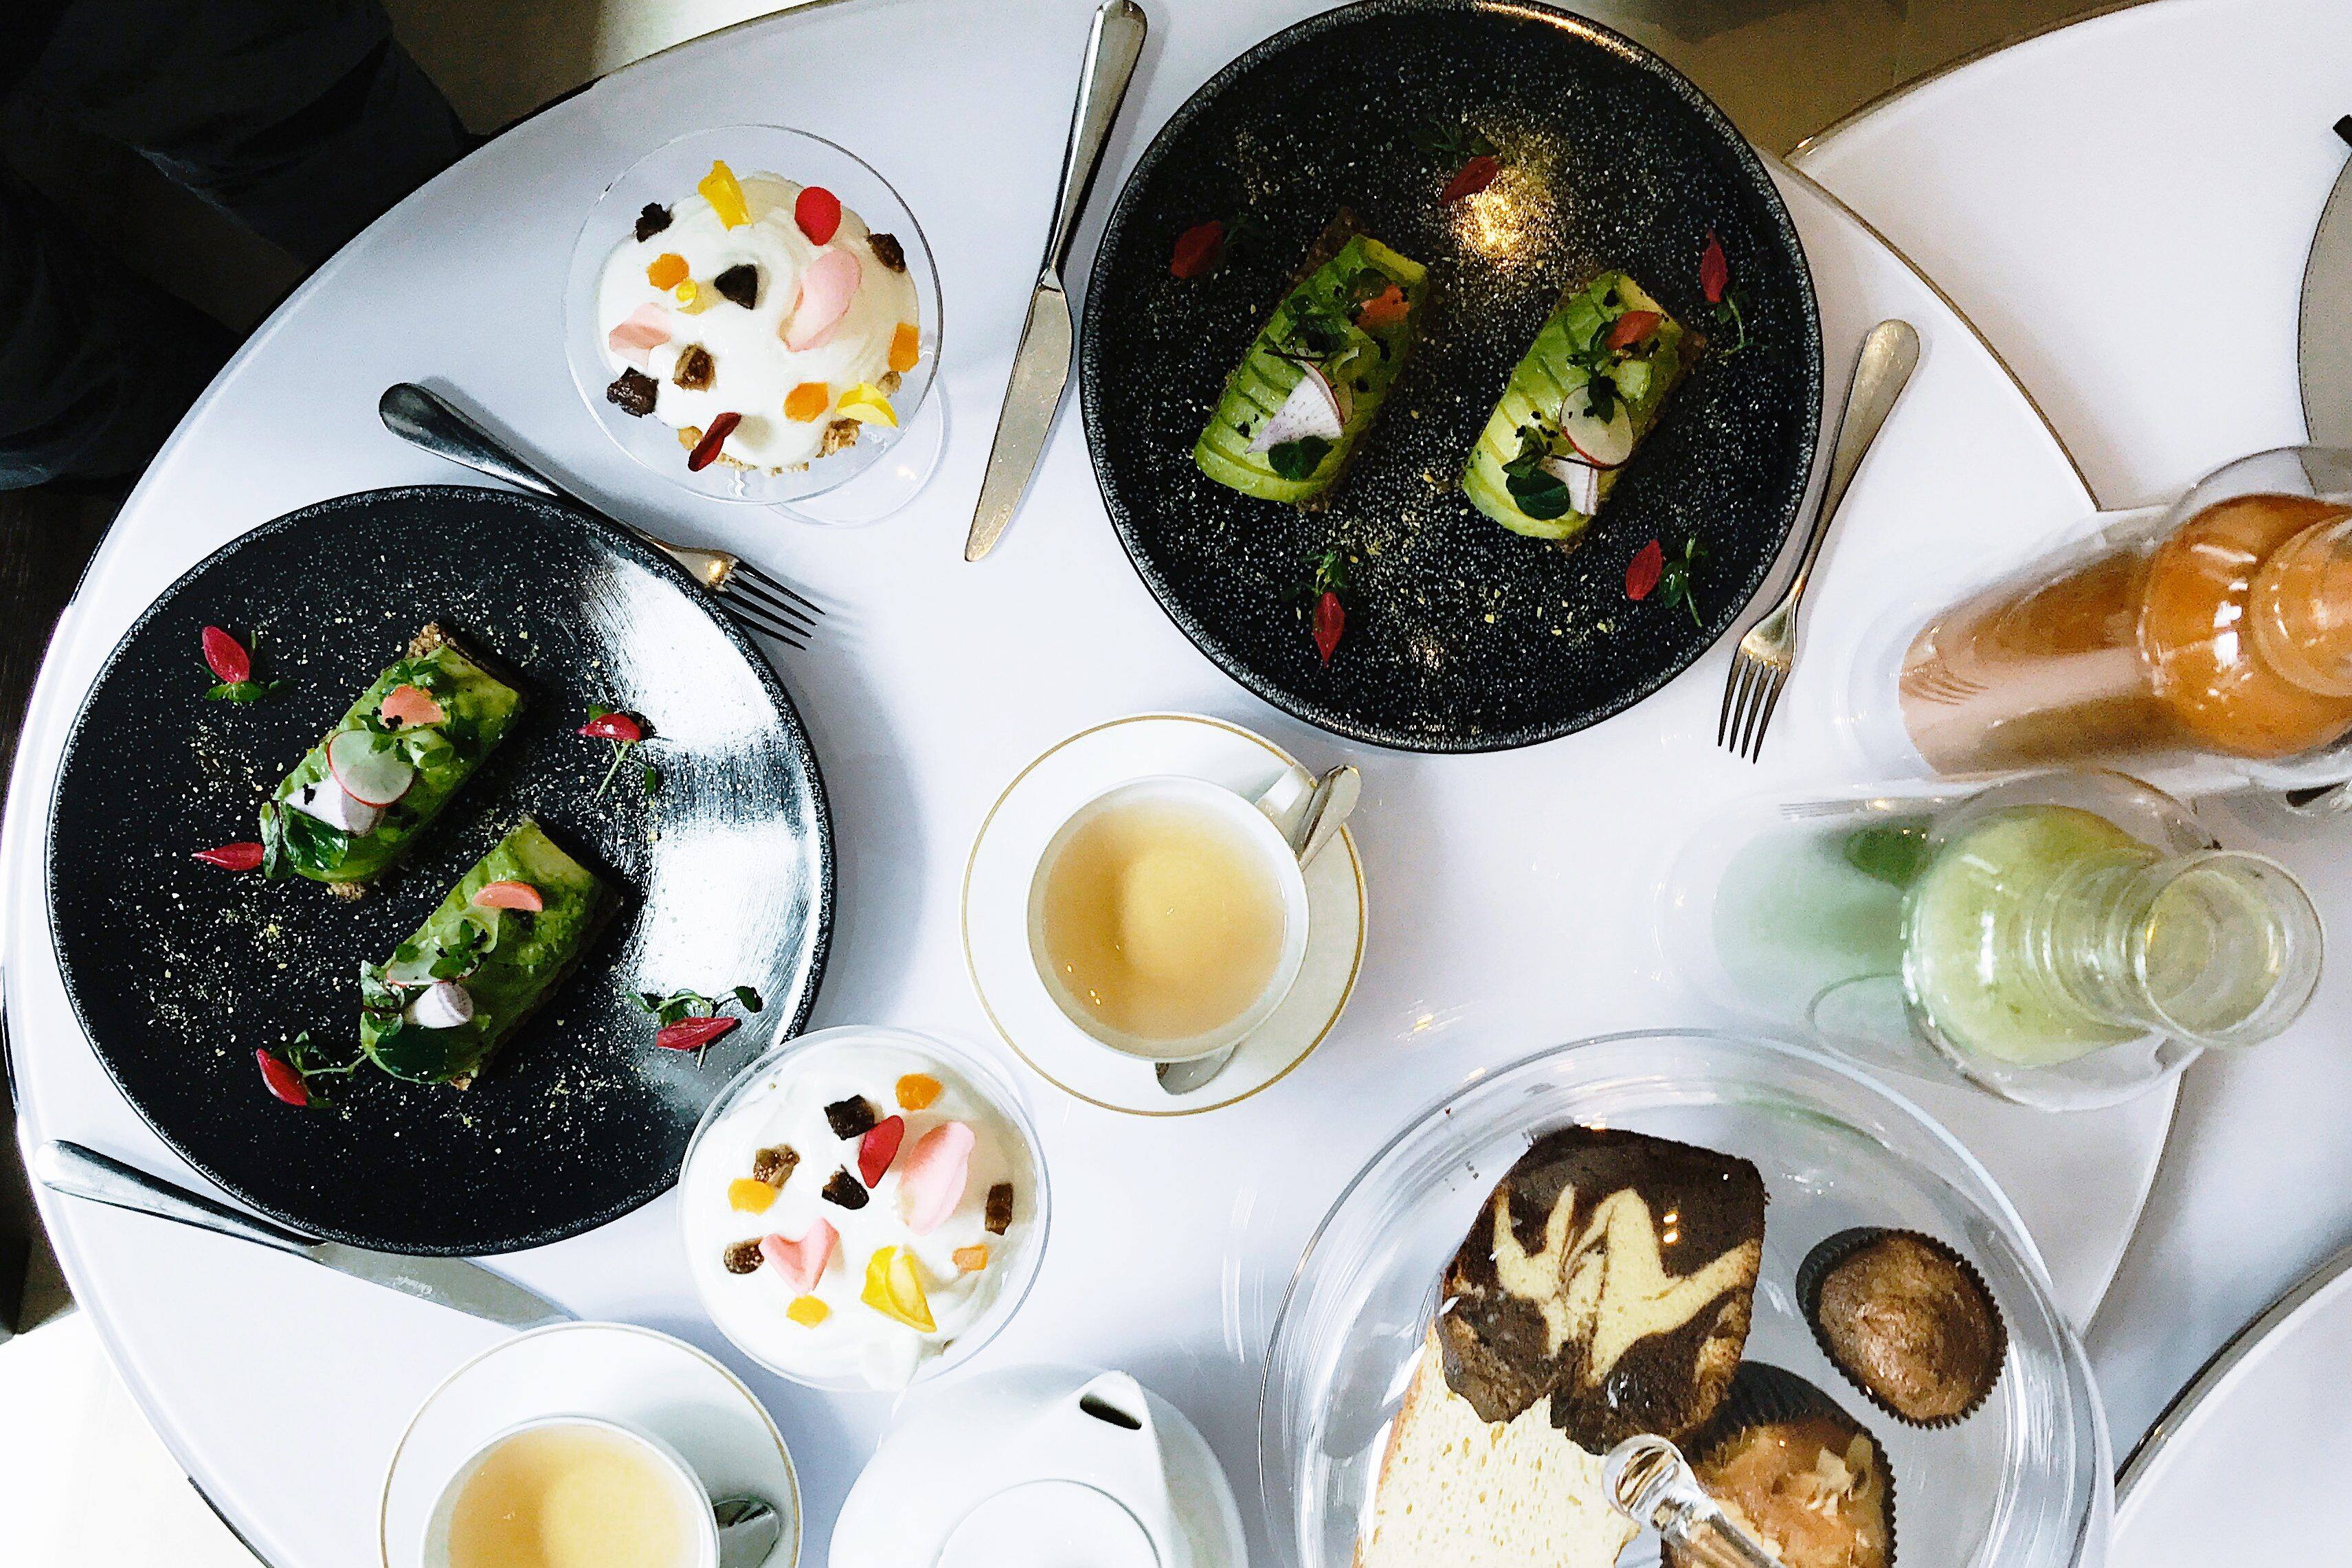 Artfully plated dishes on a table at L’Honoré 